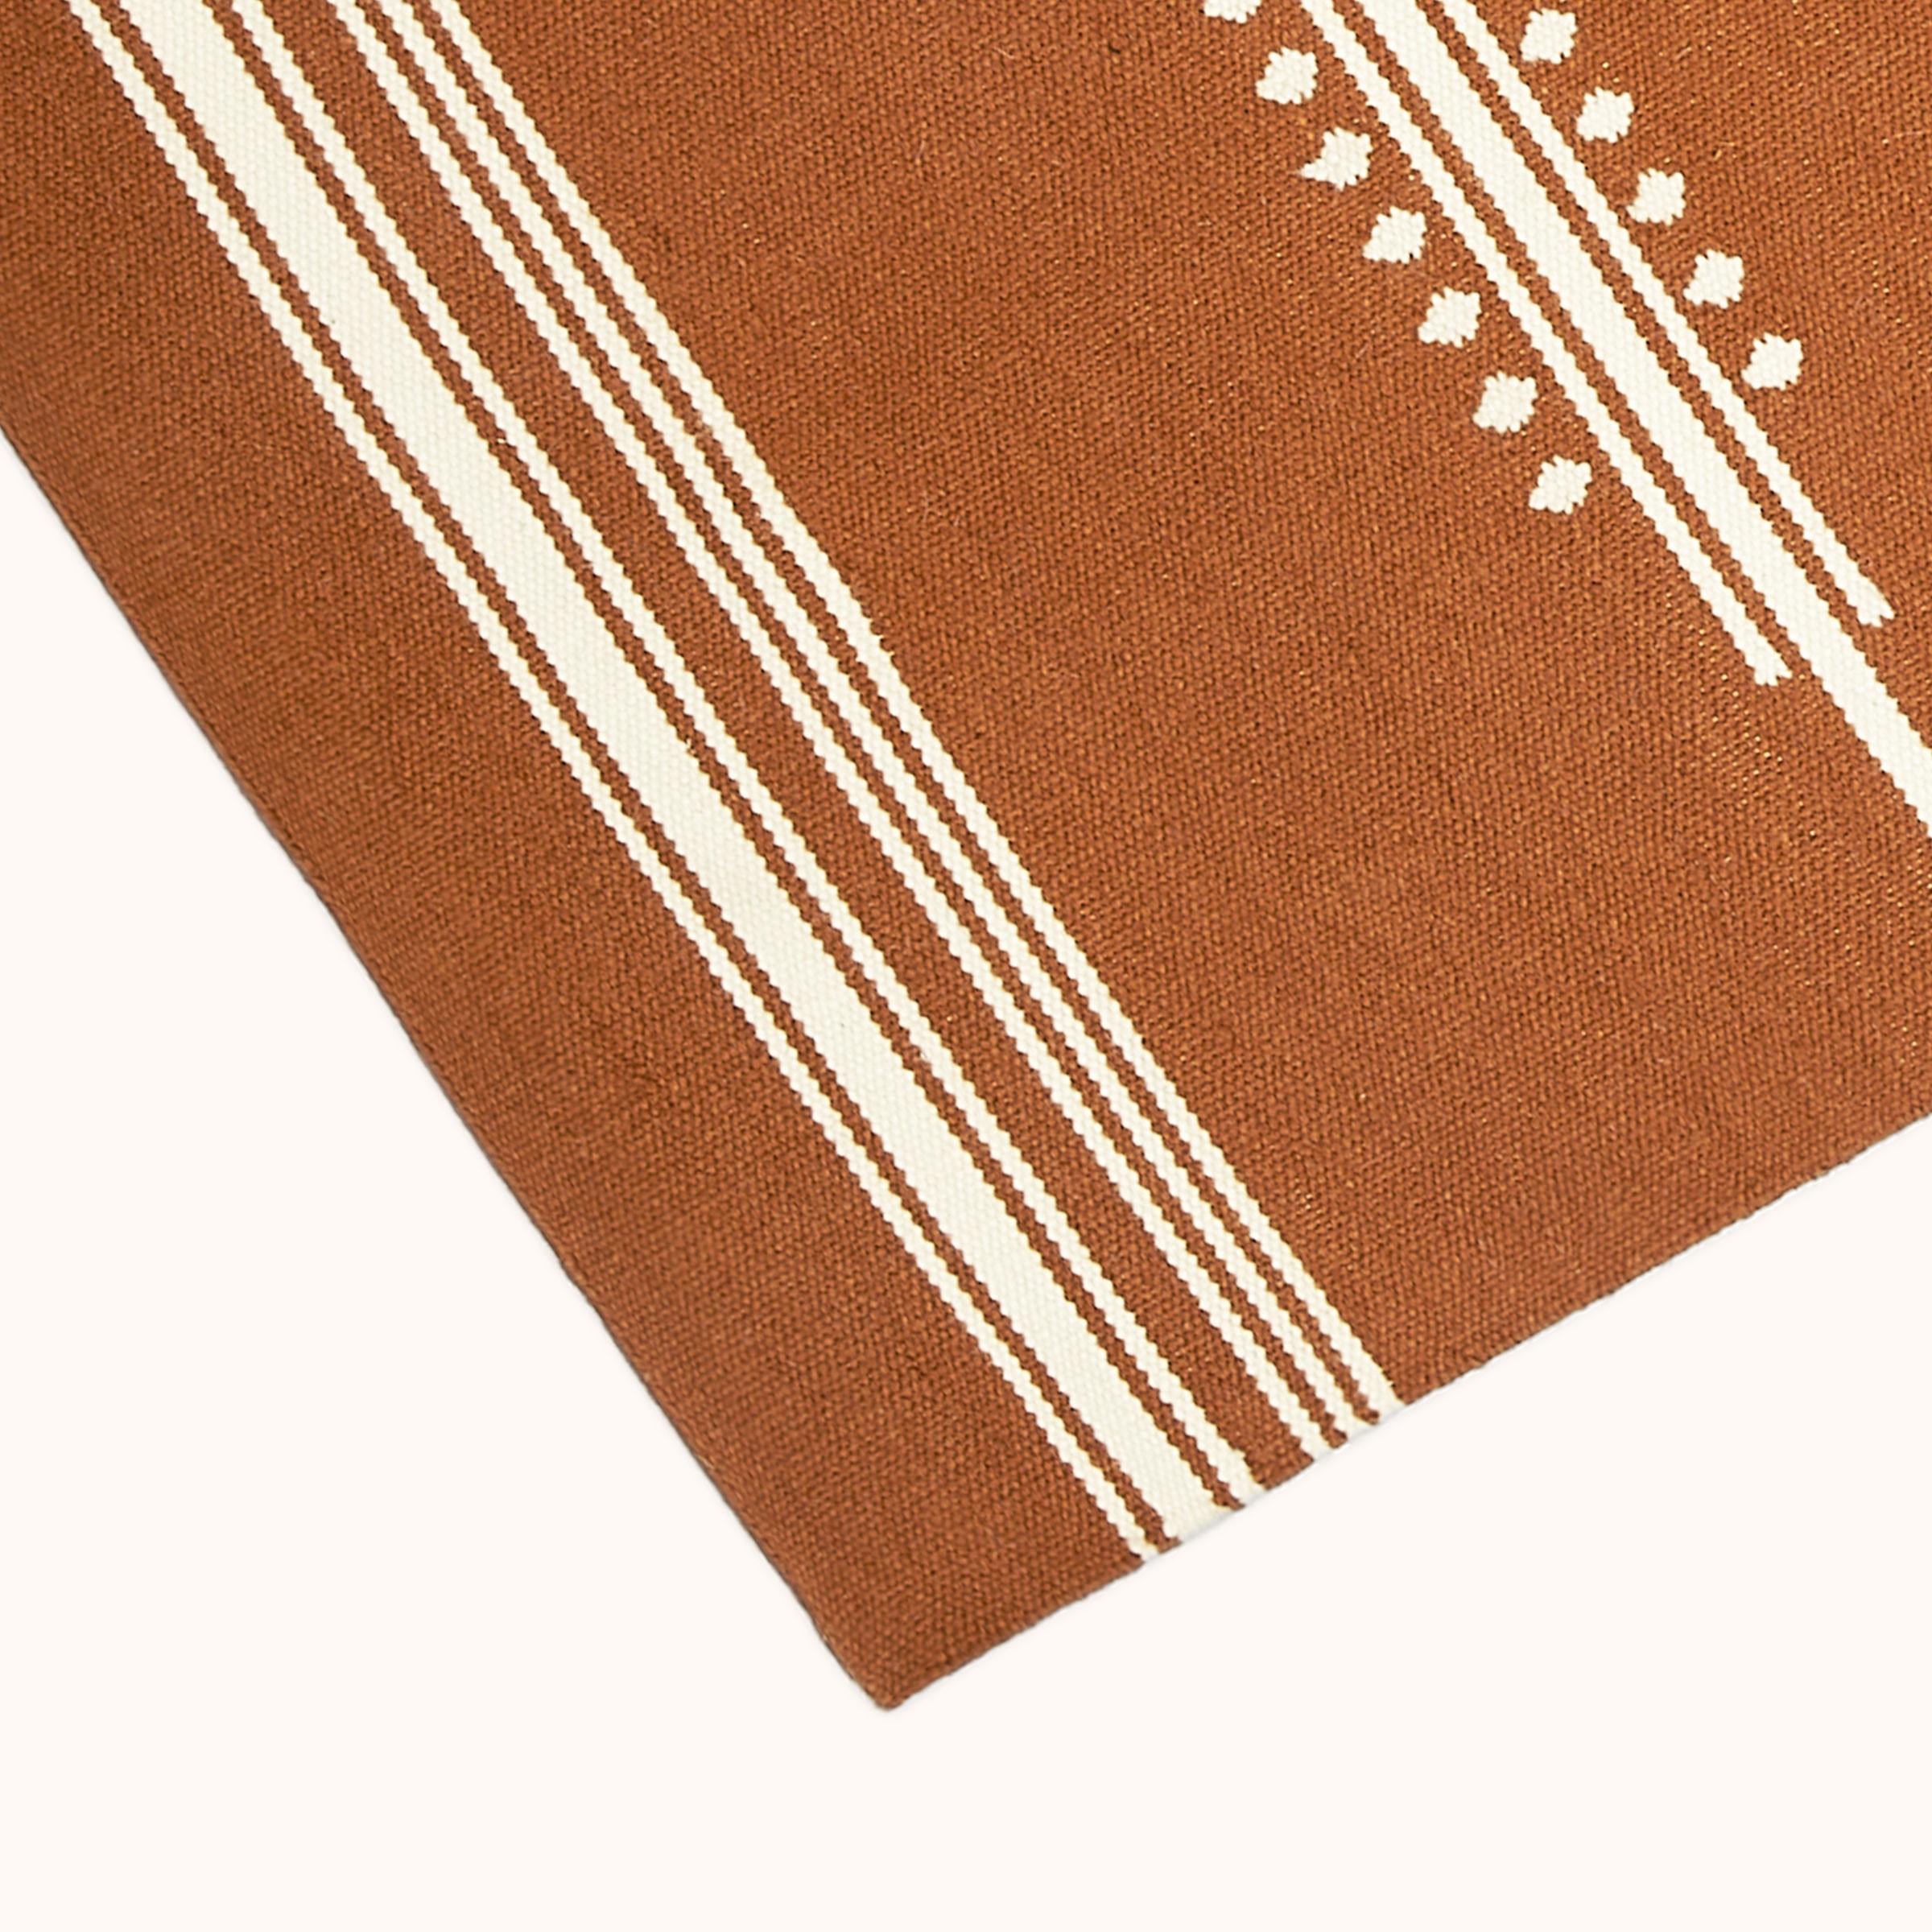 a brown and white striped rug on a white background